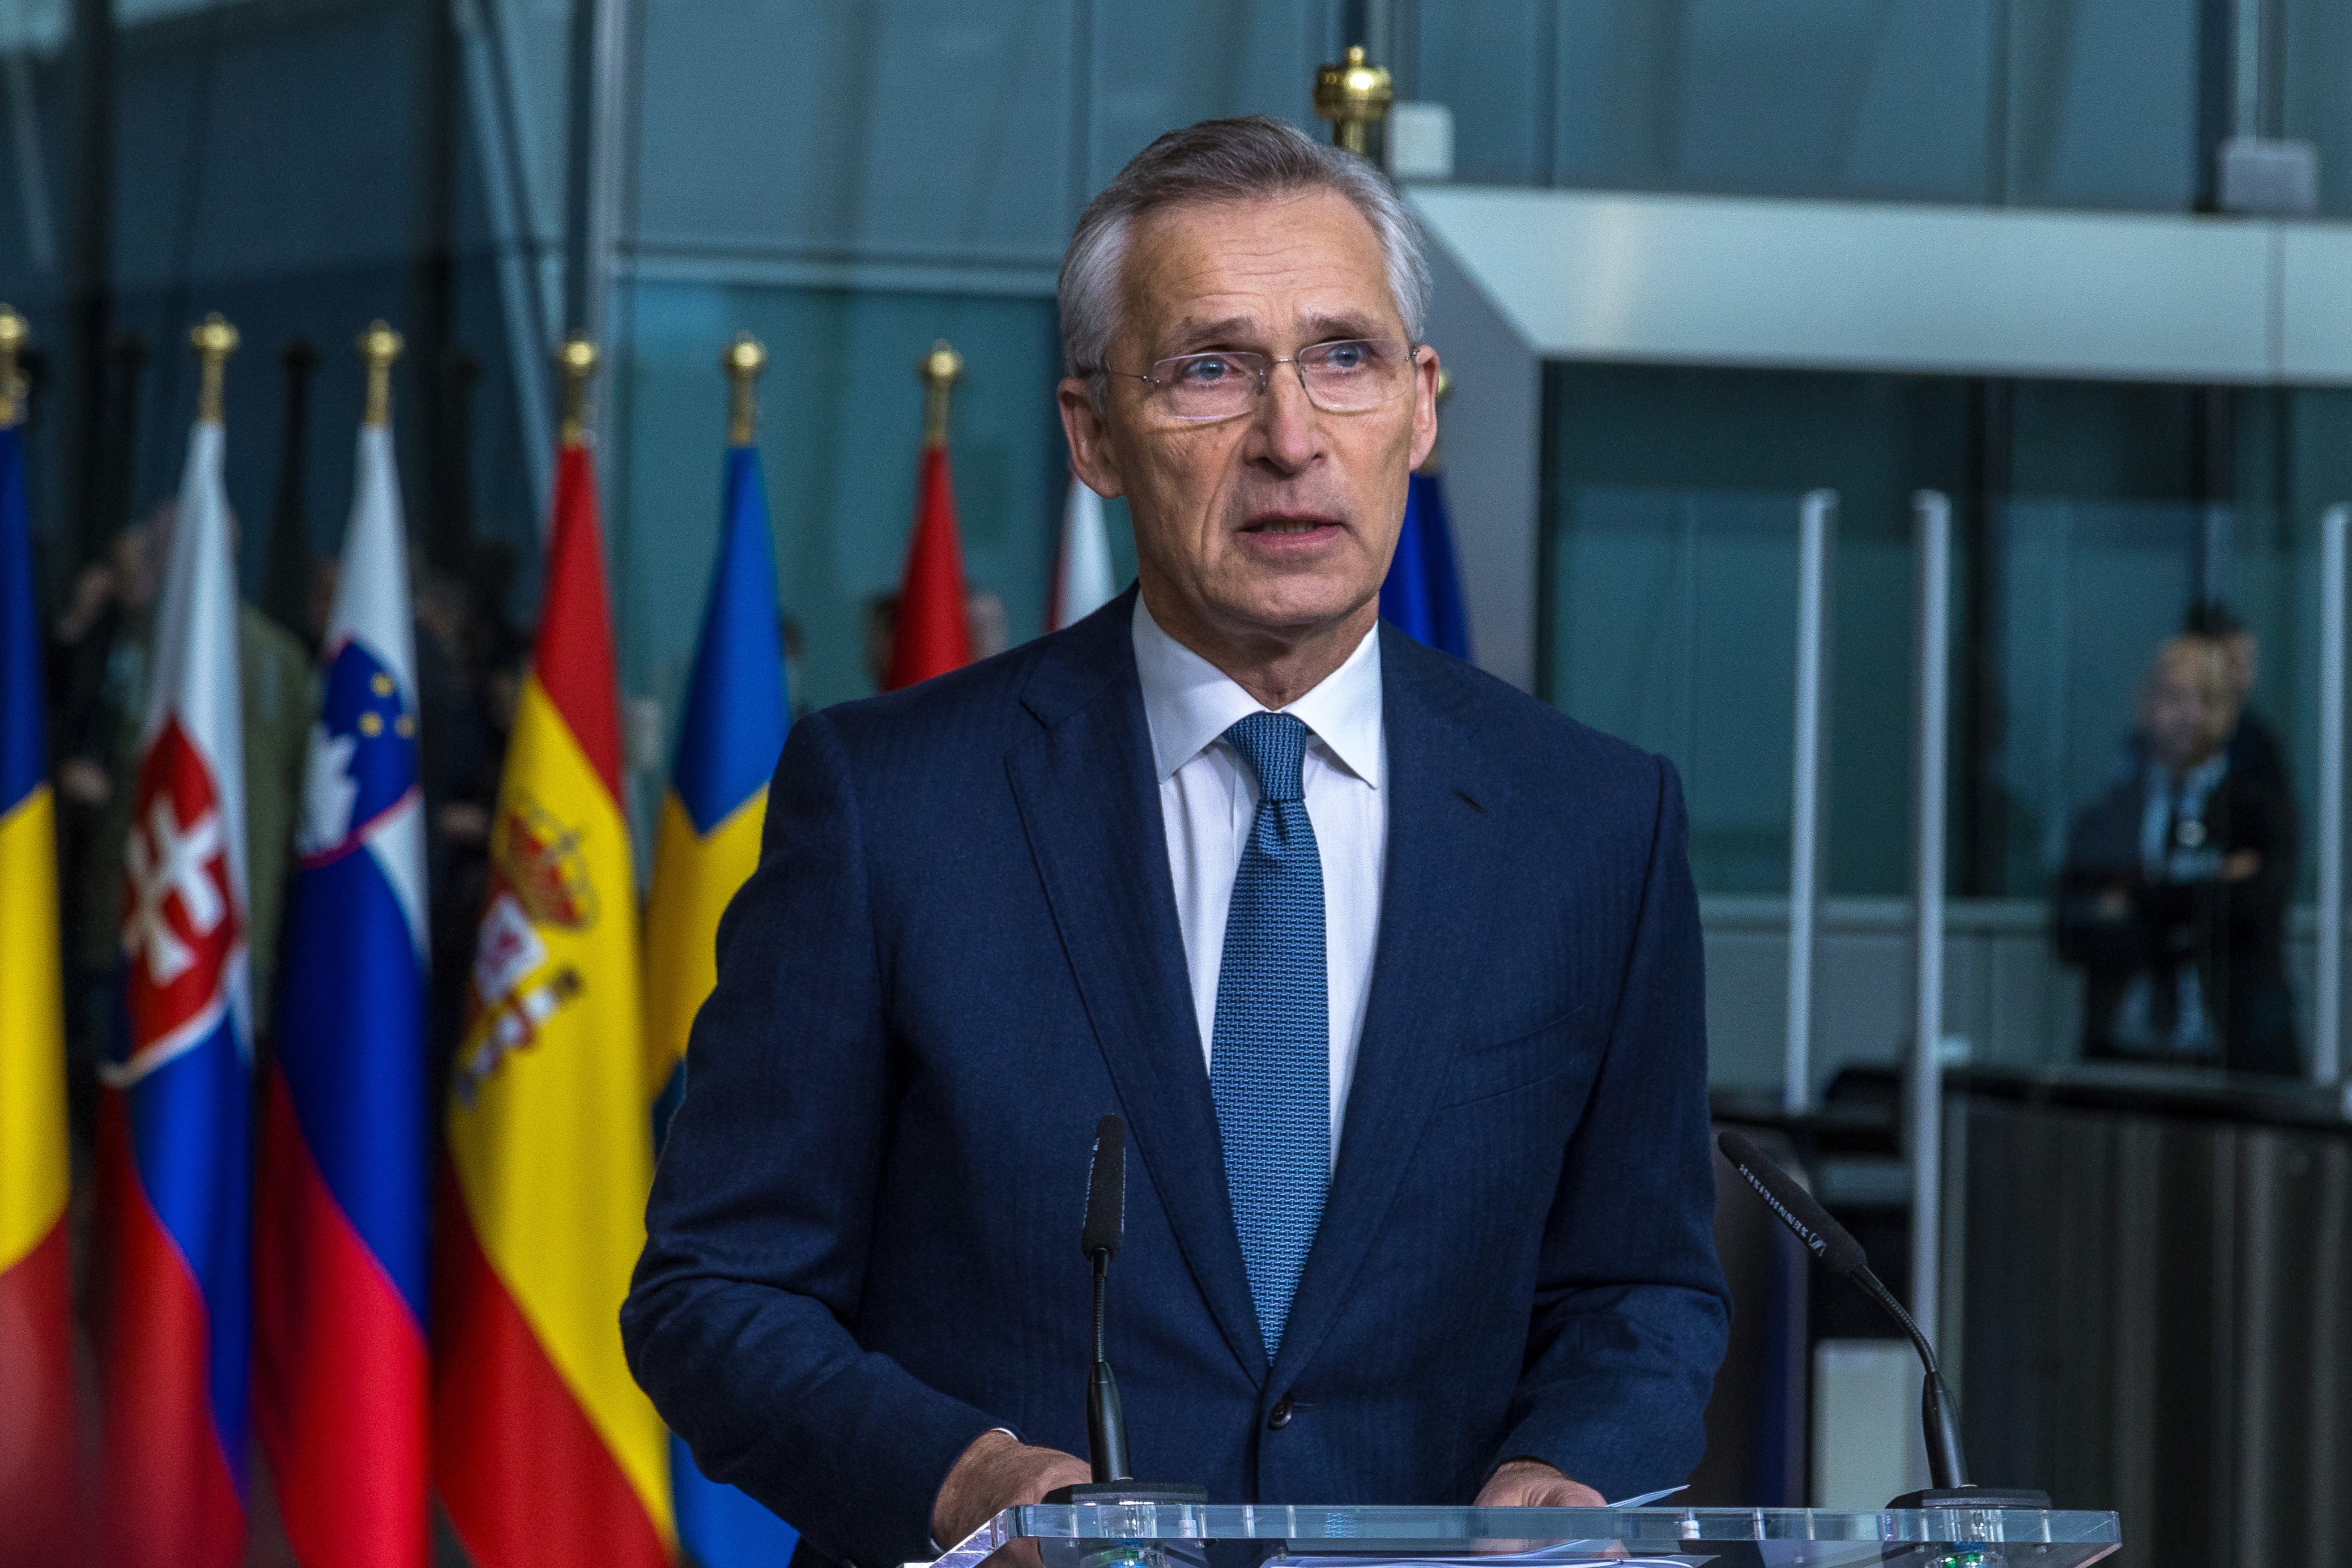 Nato secretary general Jens Stoltenberg said that providing military aid to Ukraine was the best option to push towards a peaceful solution